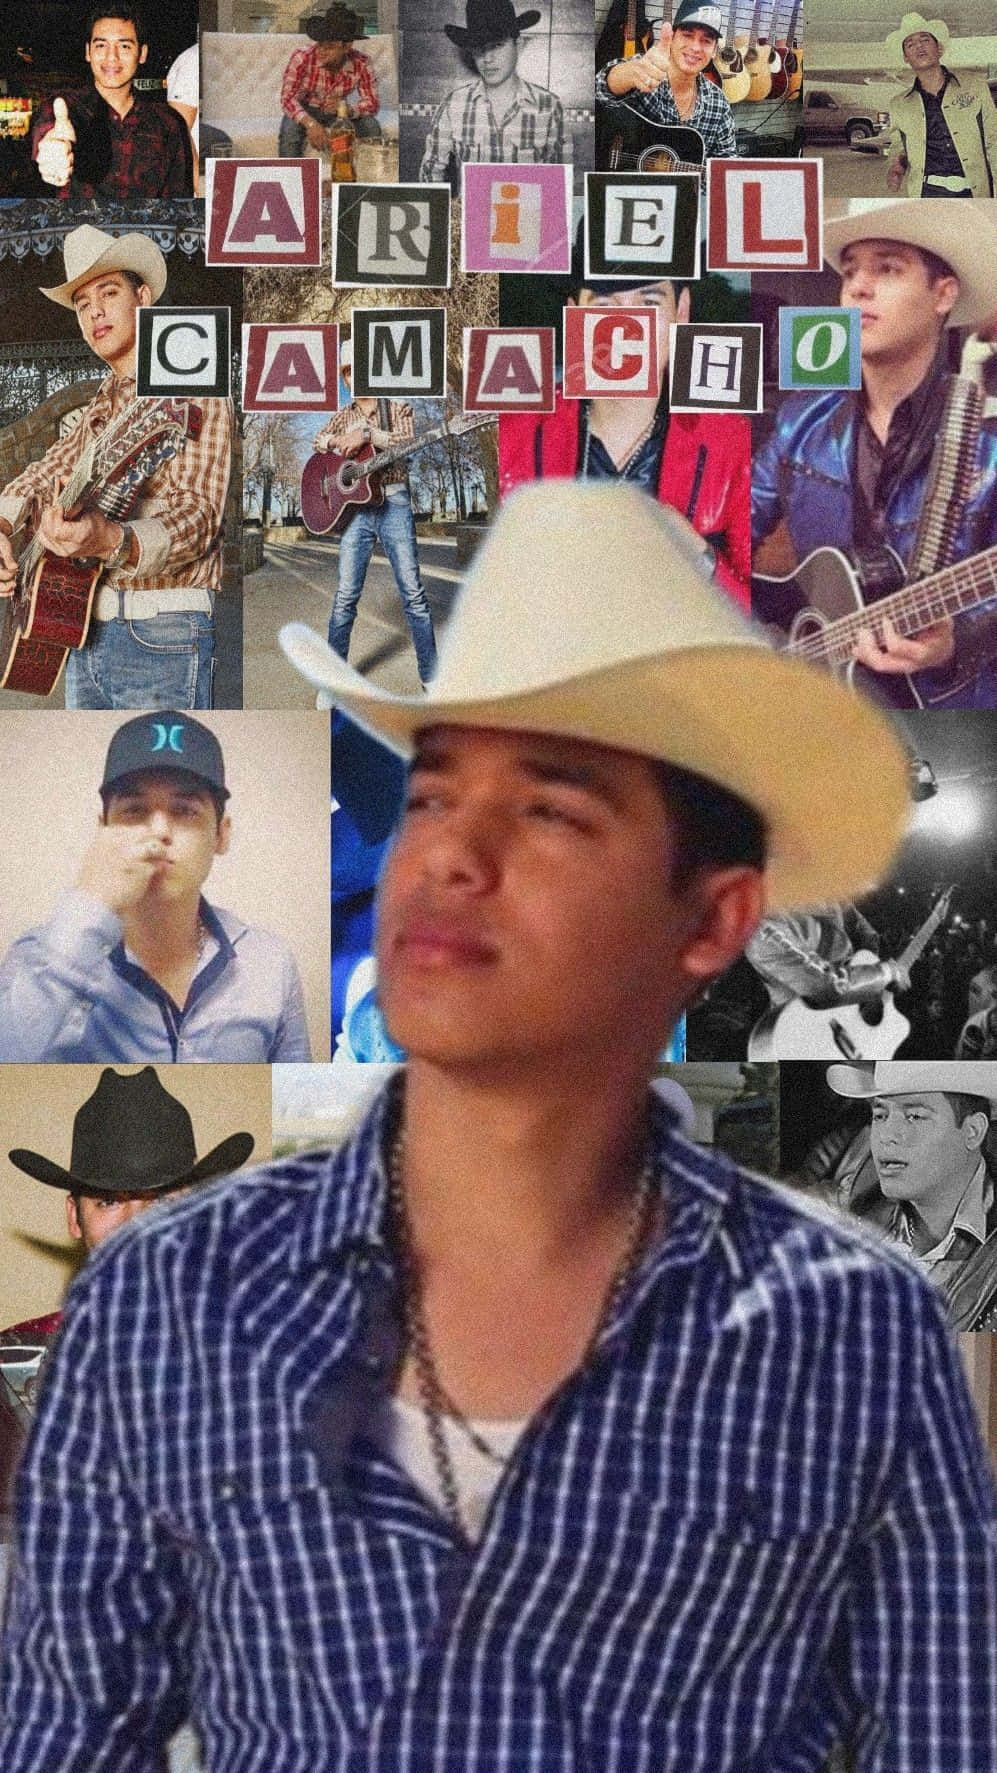 A Collage Of Photos Of A Man In A Cowboy Hat Wallpaper